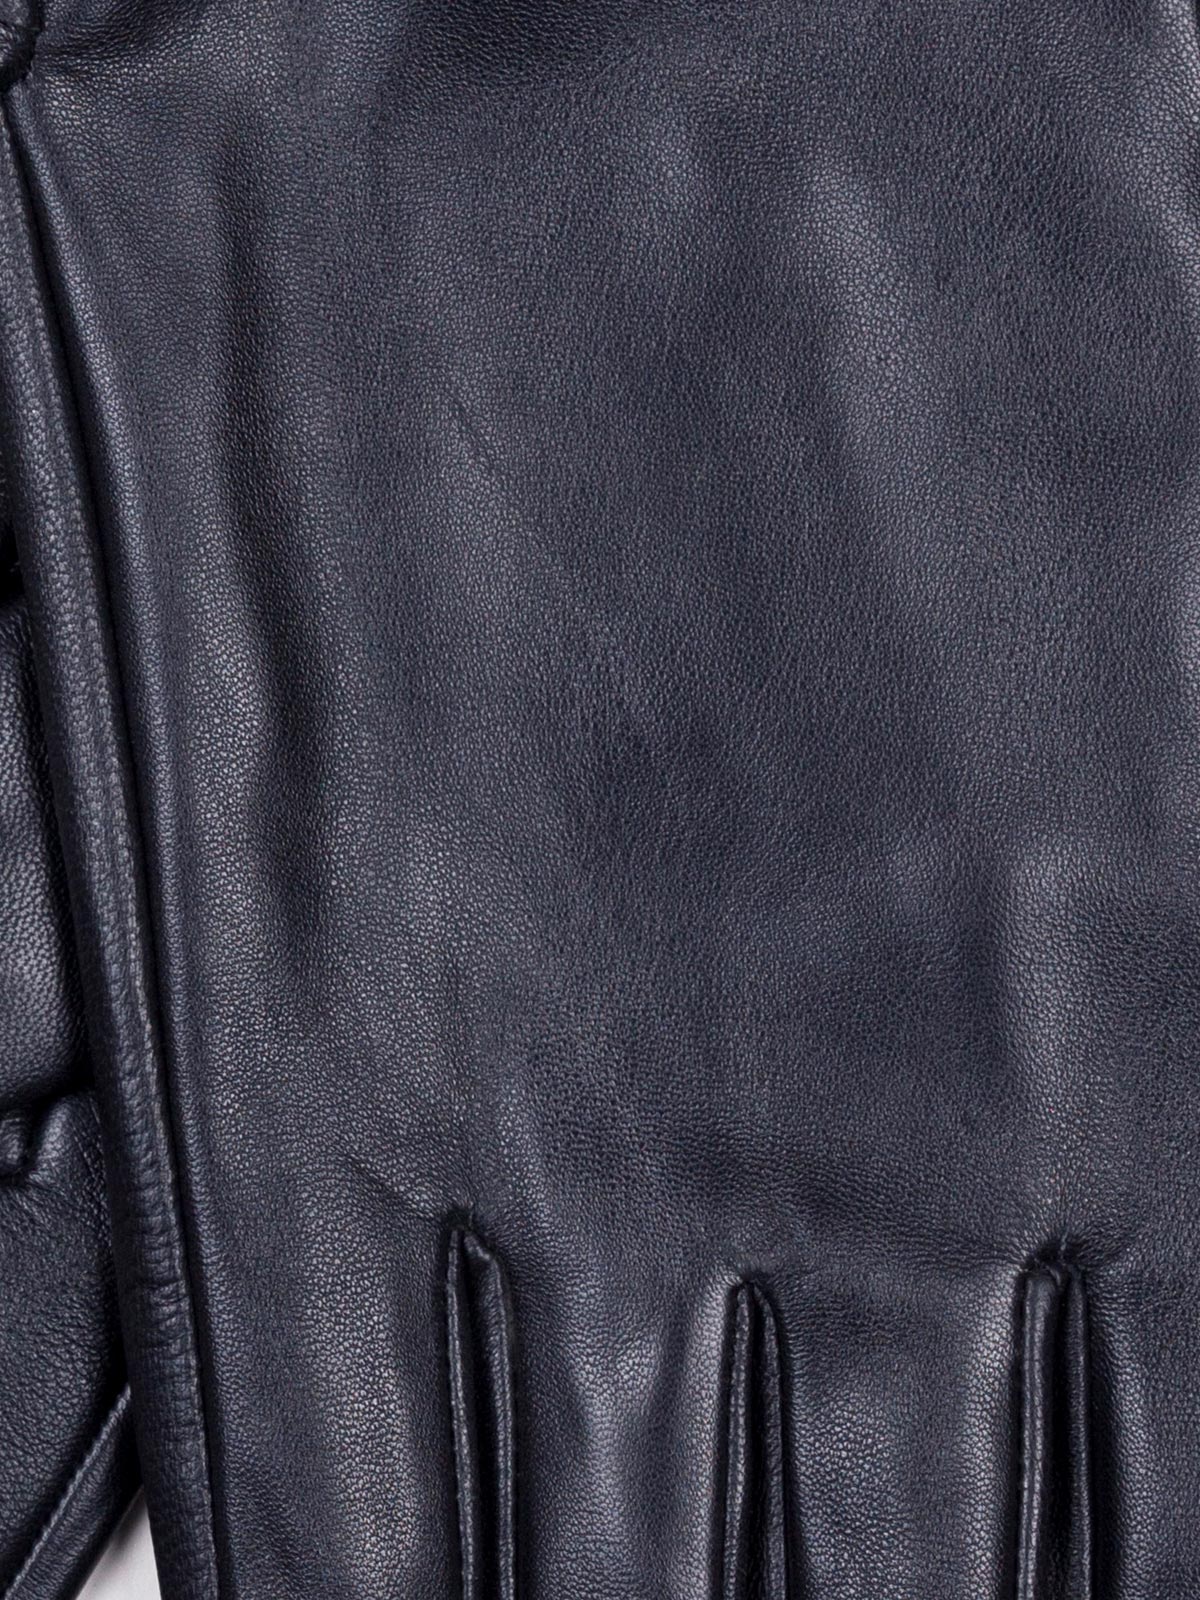  black pure leather gloves  - 10571 - € 31.50 img2